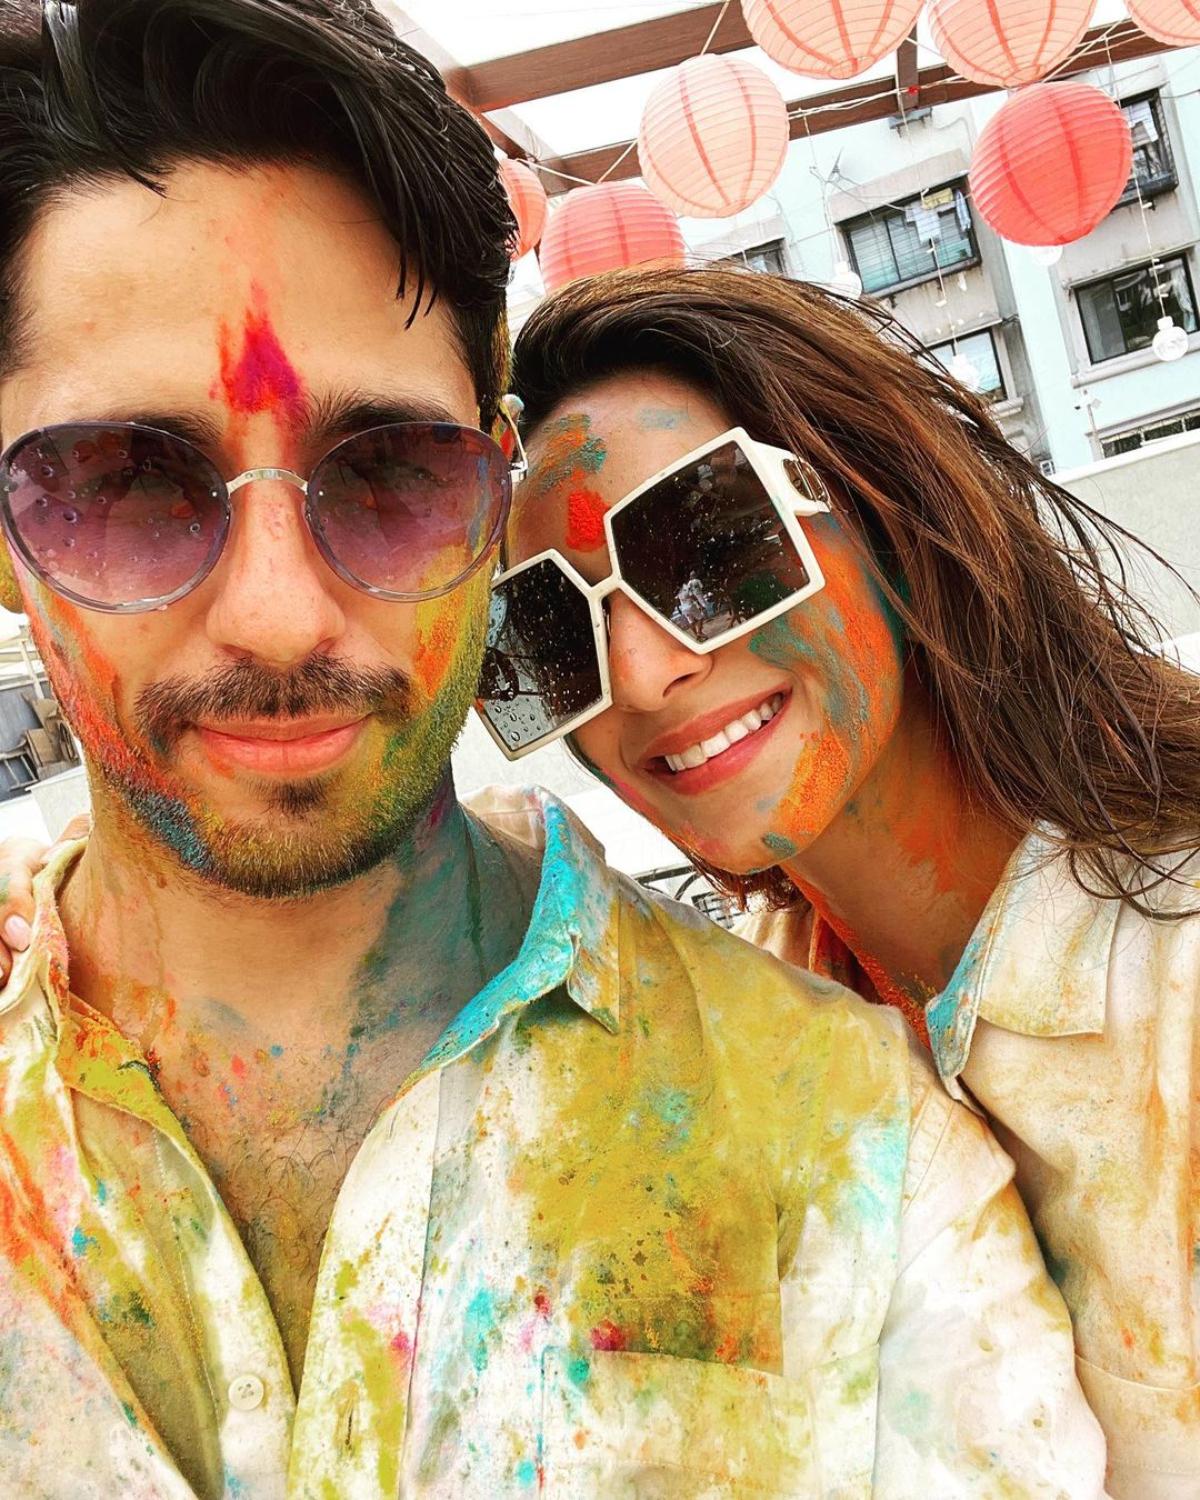 Newlyweds and one of the most adorable couples in Bollywood, Sidharth Malhotra and his better half, actor Kiara Advani celebrated their first Holi together after getting hitched. The 'Shershaah' star, Sidharth Malhotra on Tuesday took to Instagram to drop a cutesy selfie of him and his wife Kiara. Twinning in white, the couple looked adorable as they posed with colourful faces and flashed smiles for the click. 